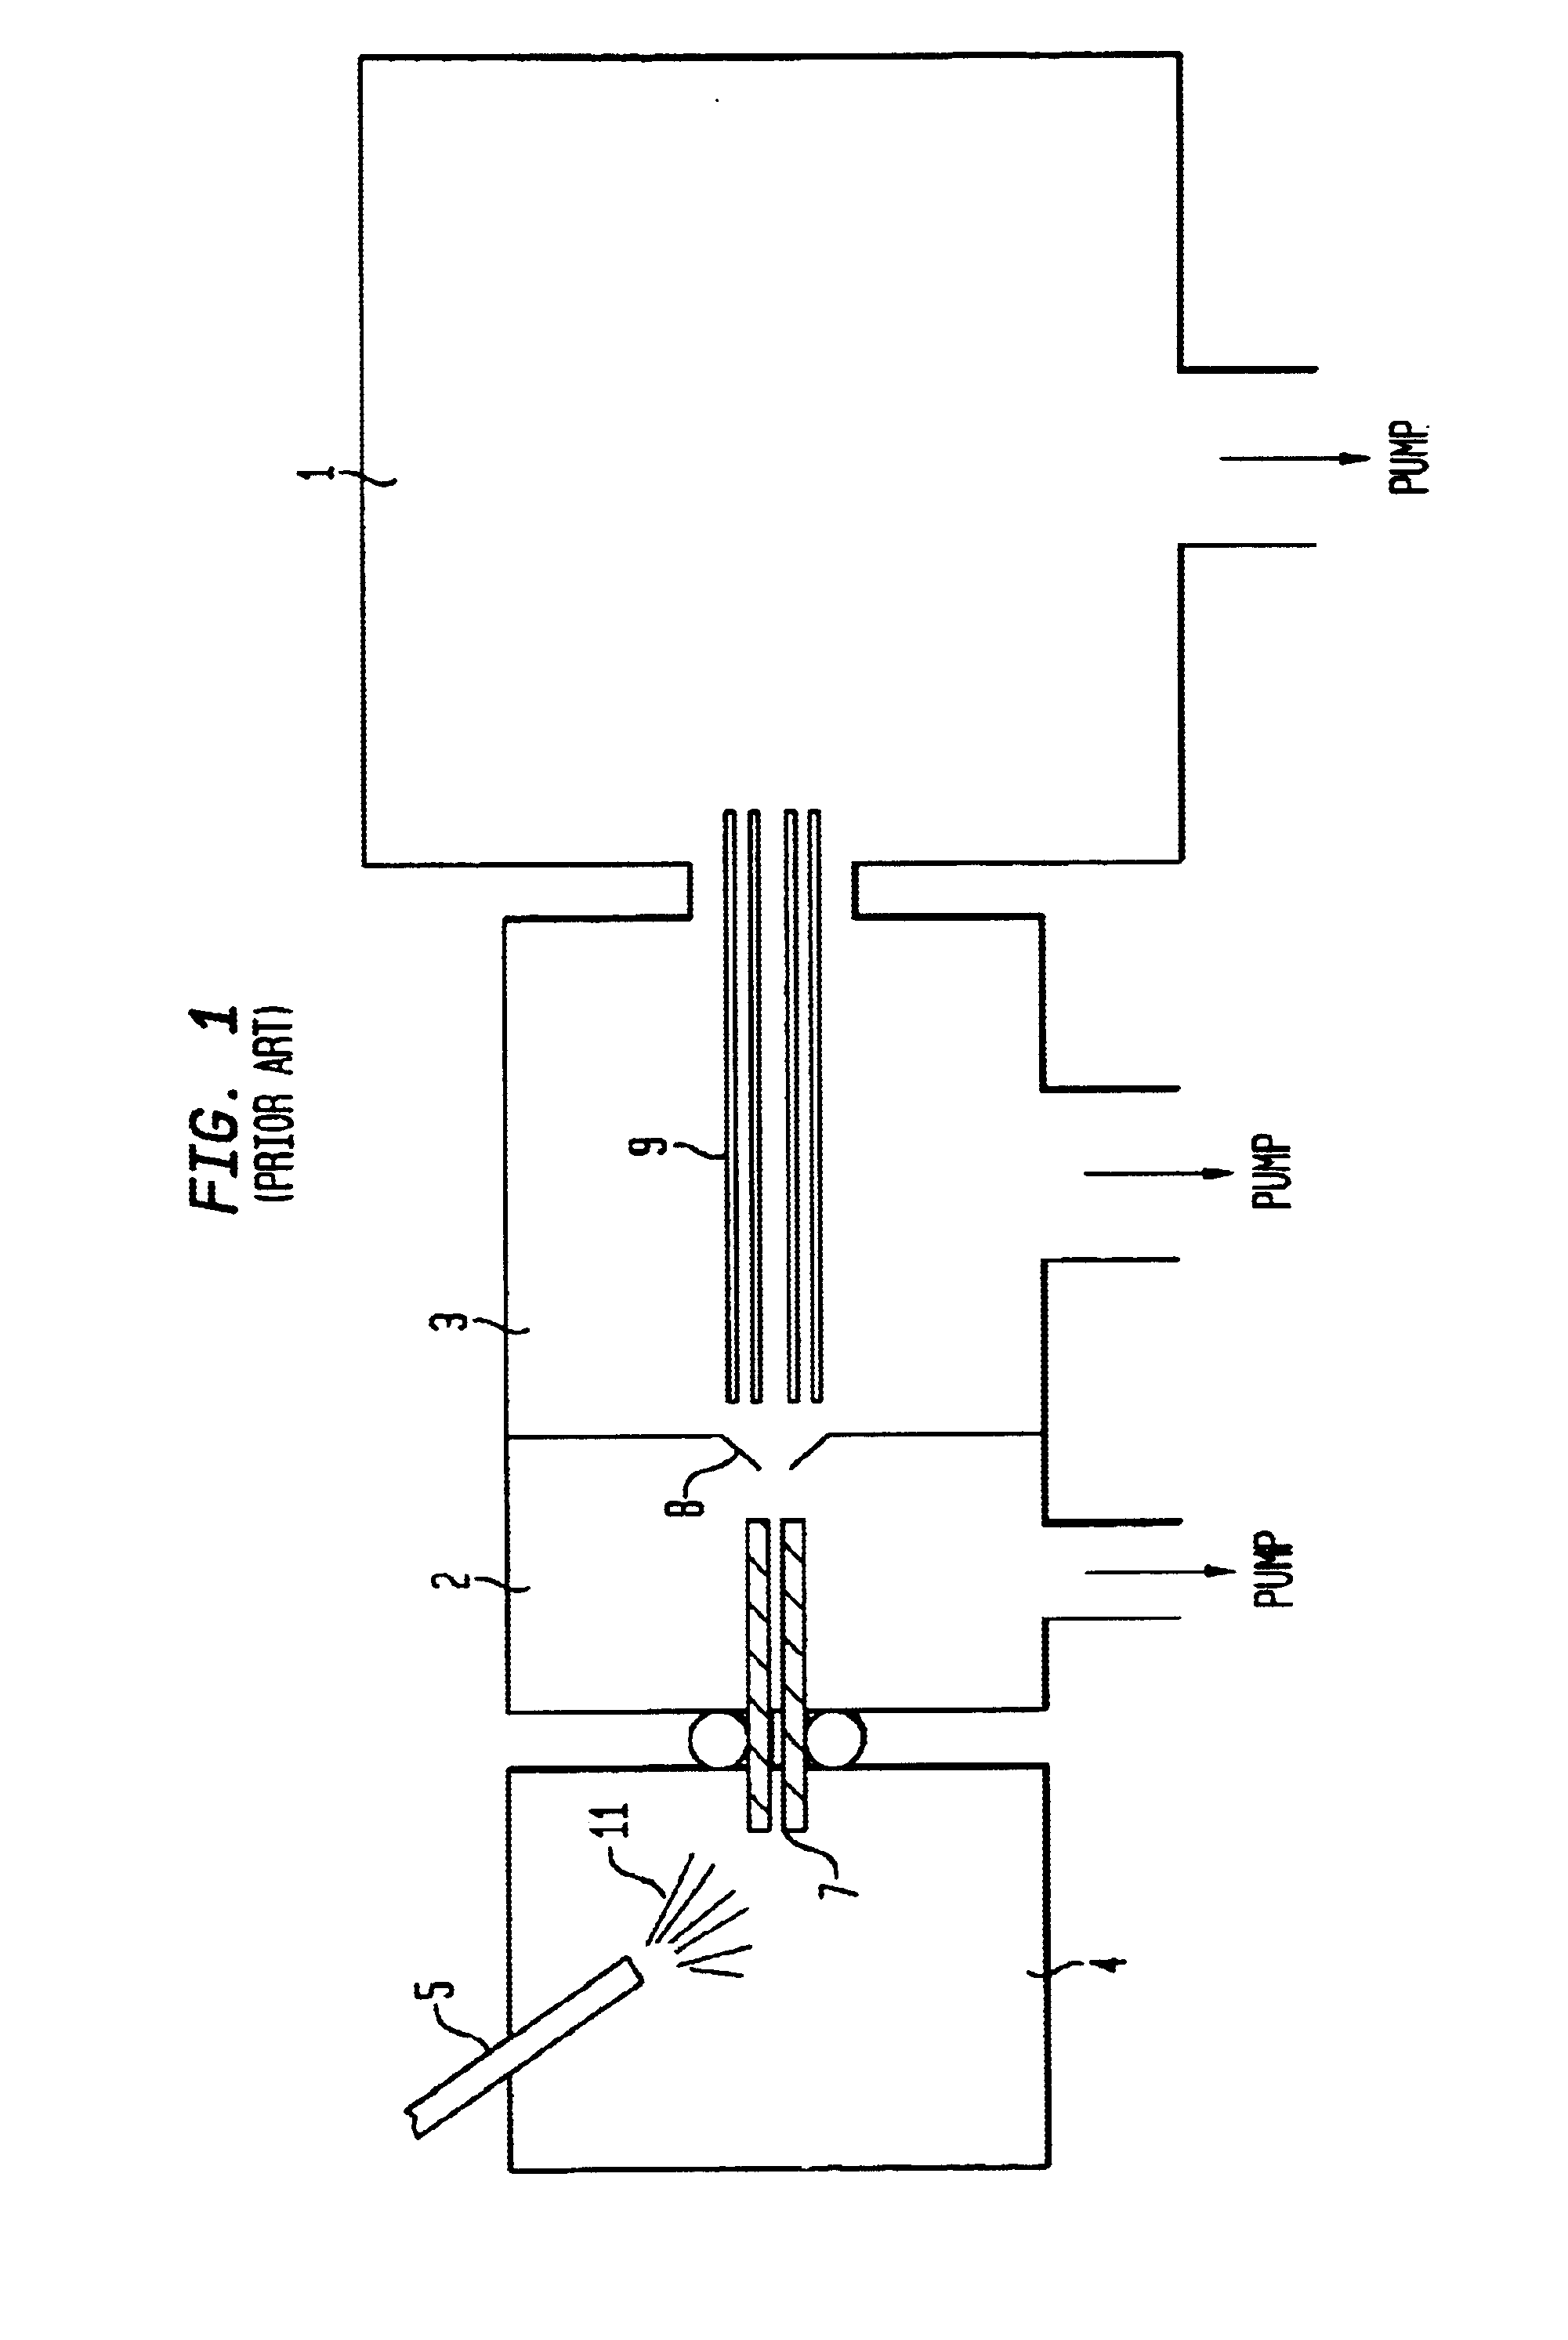 Ionization source chamber and ion beam delivery system for mass spectrometry